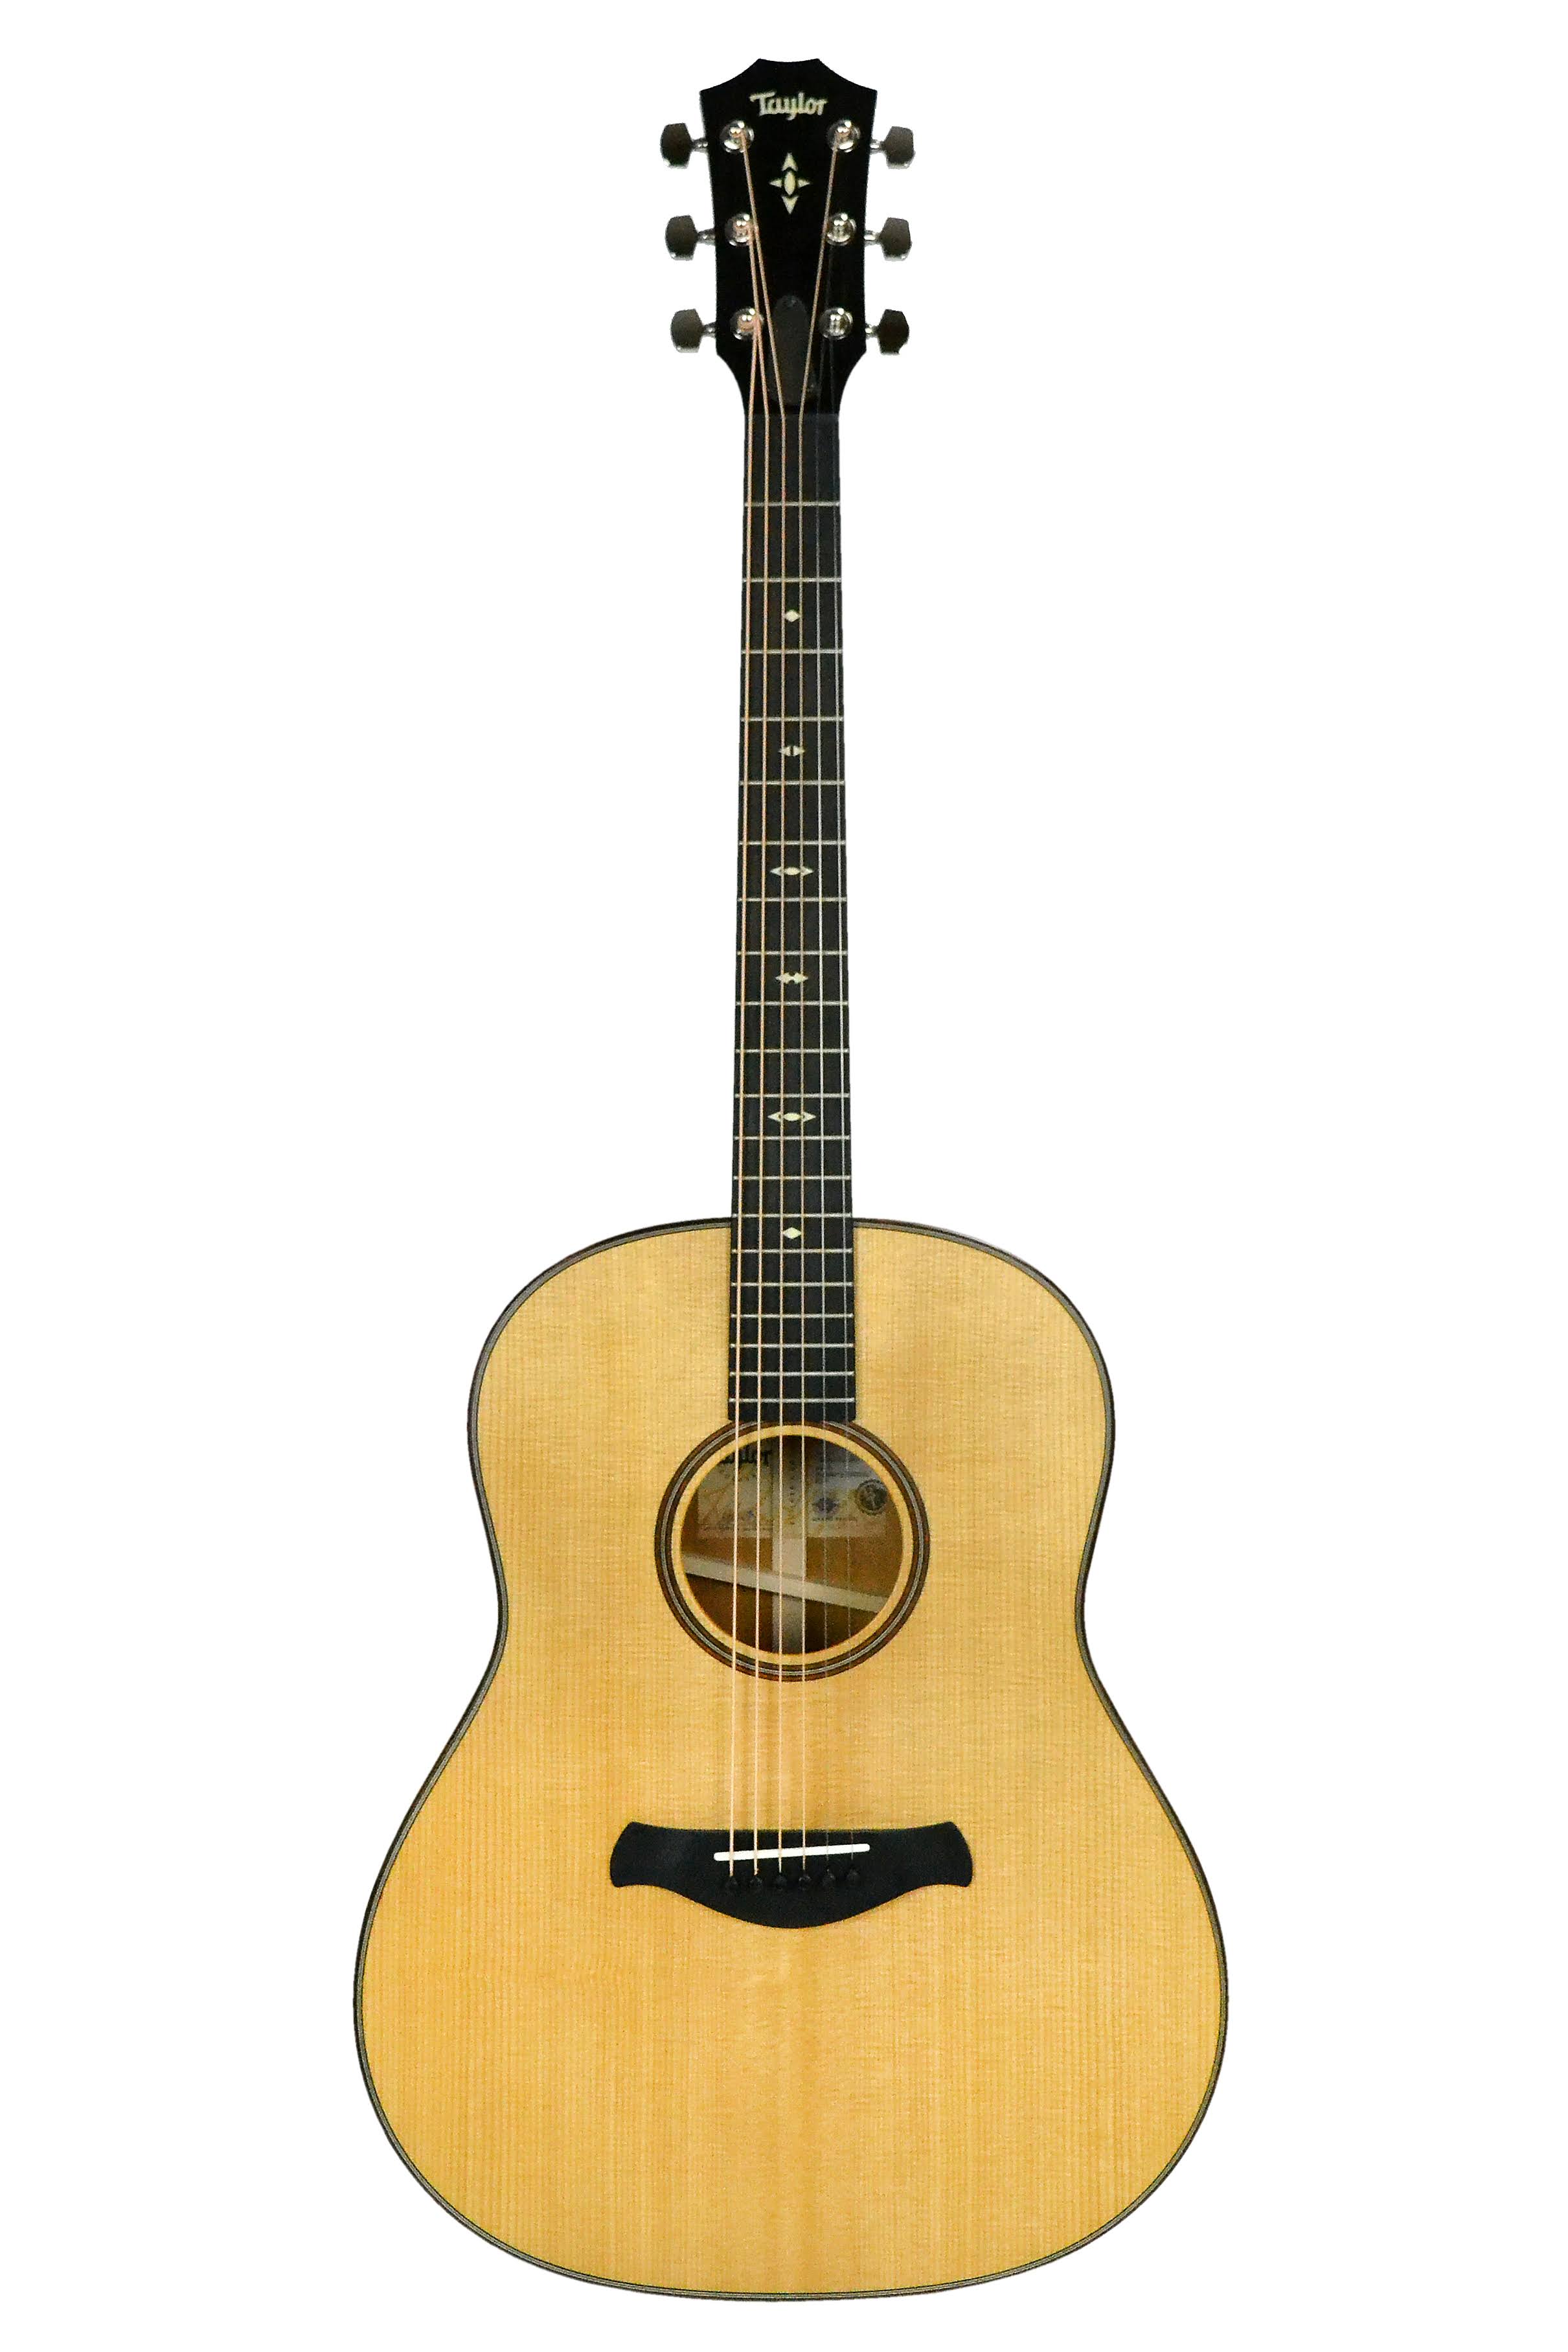 Taylor Builder's Edition 517 Grand Pacific Acoustic Guitar